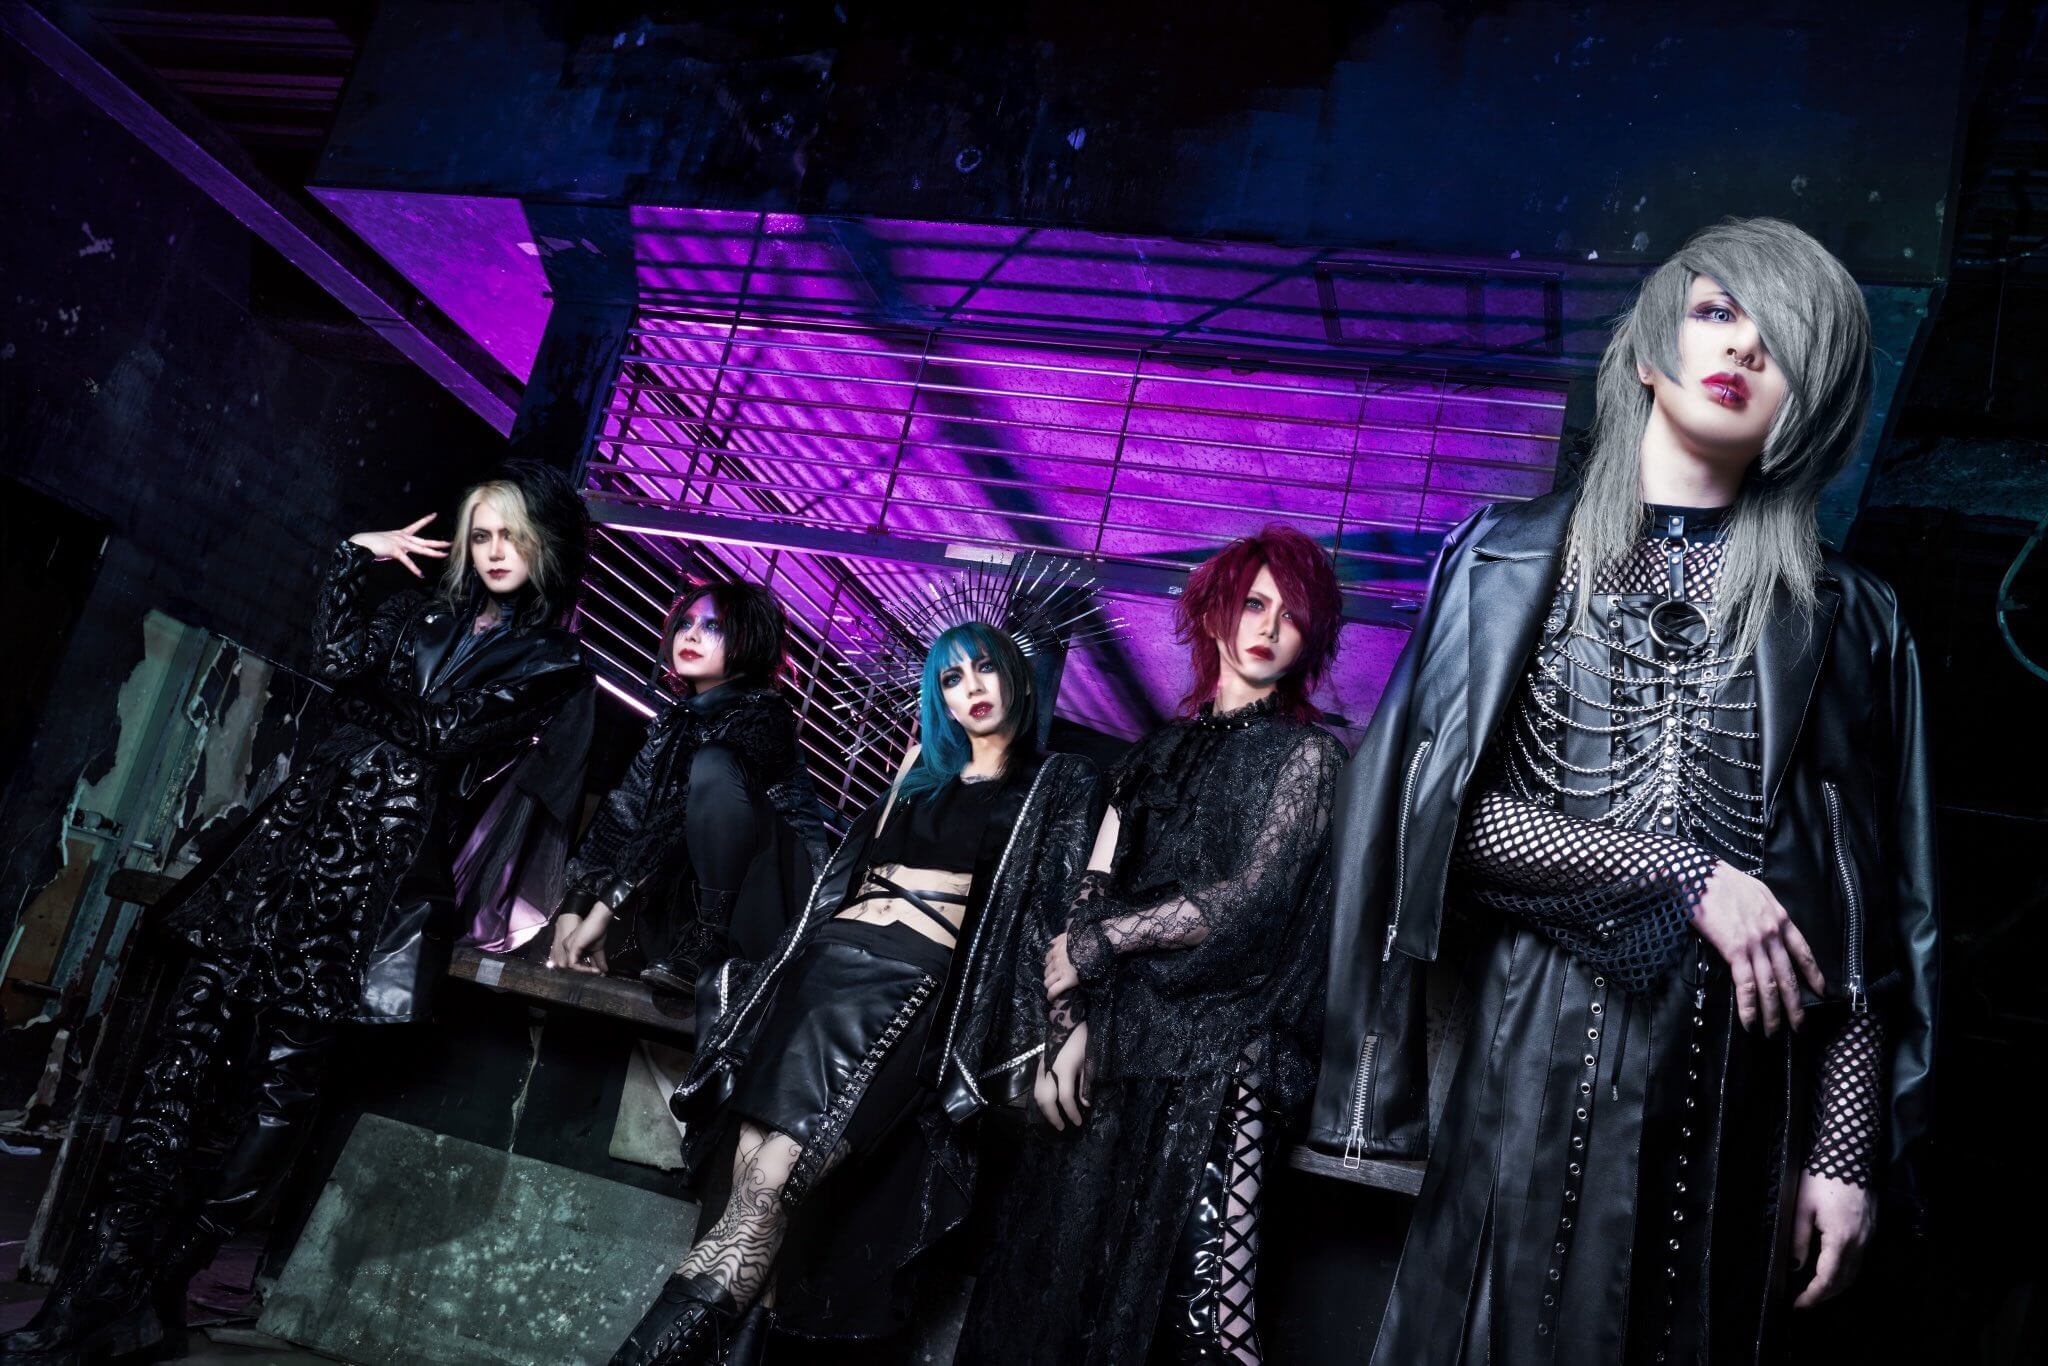 VELTRO has changed into an official band: DAMNED